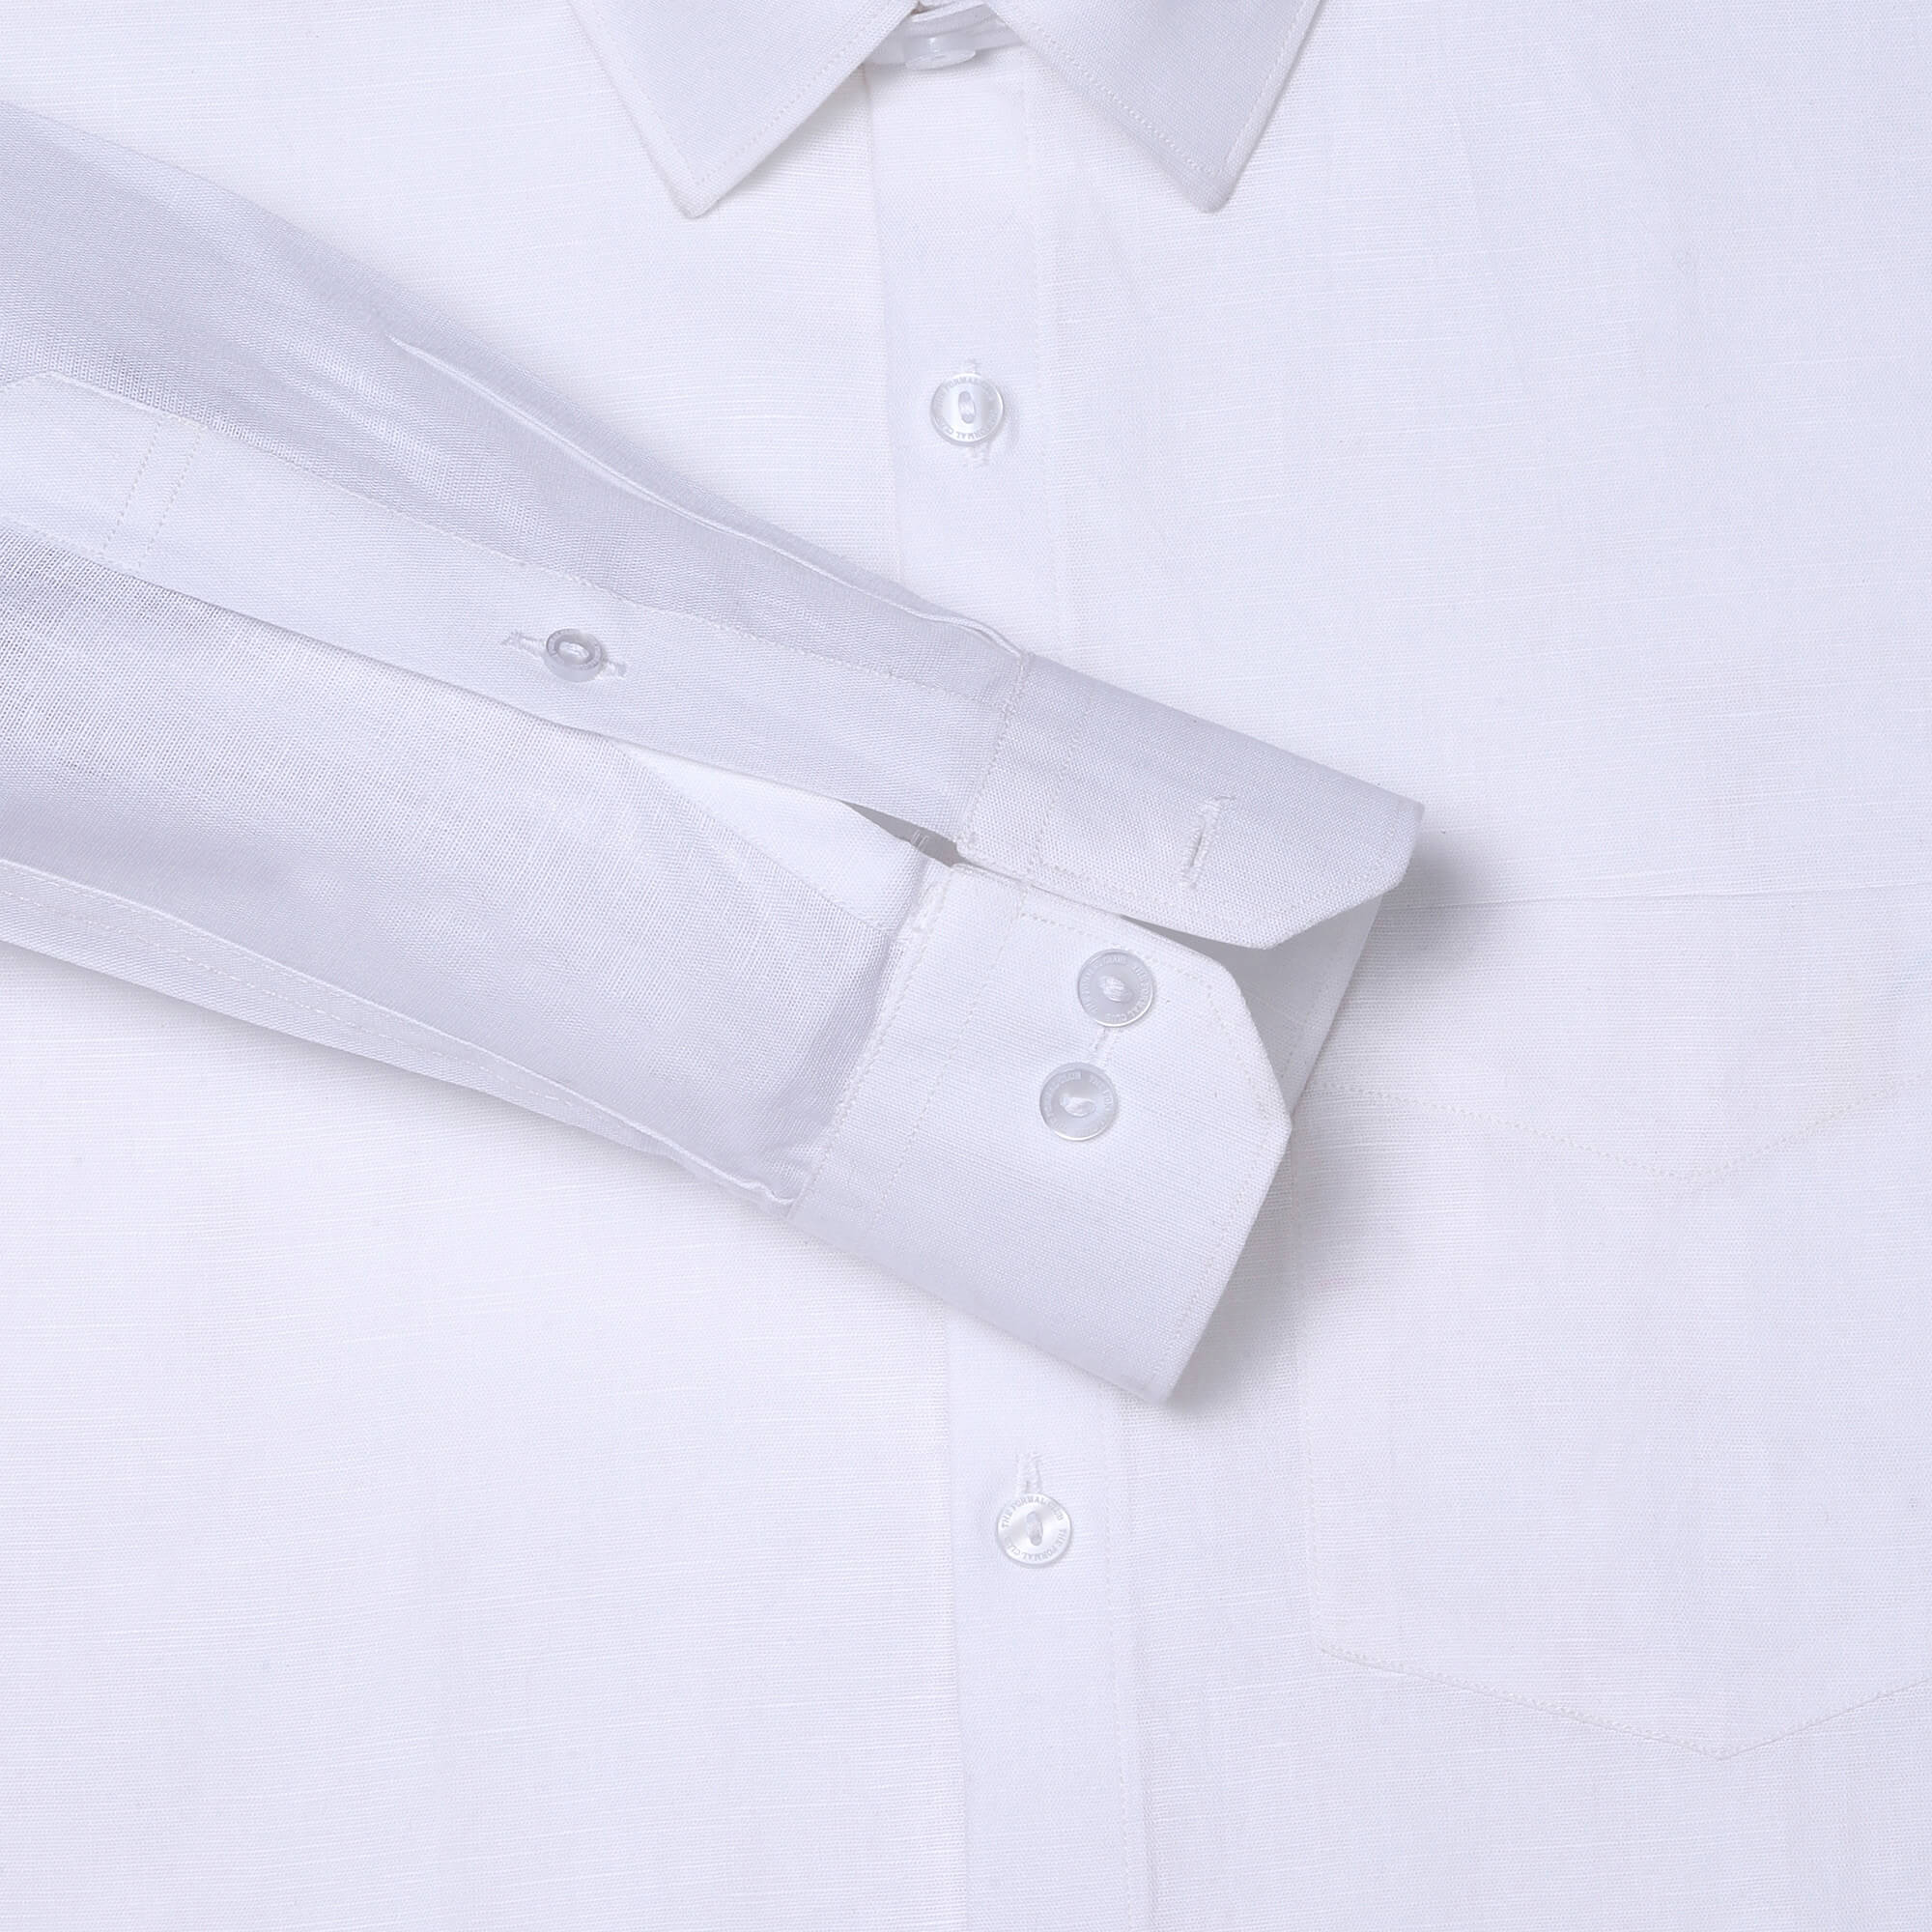 Luna Lenin Solid Shirt In Cool White - The Formal Club